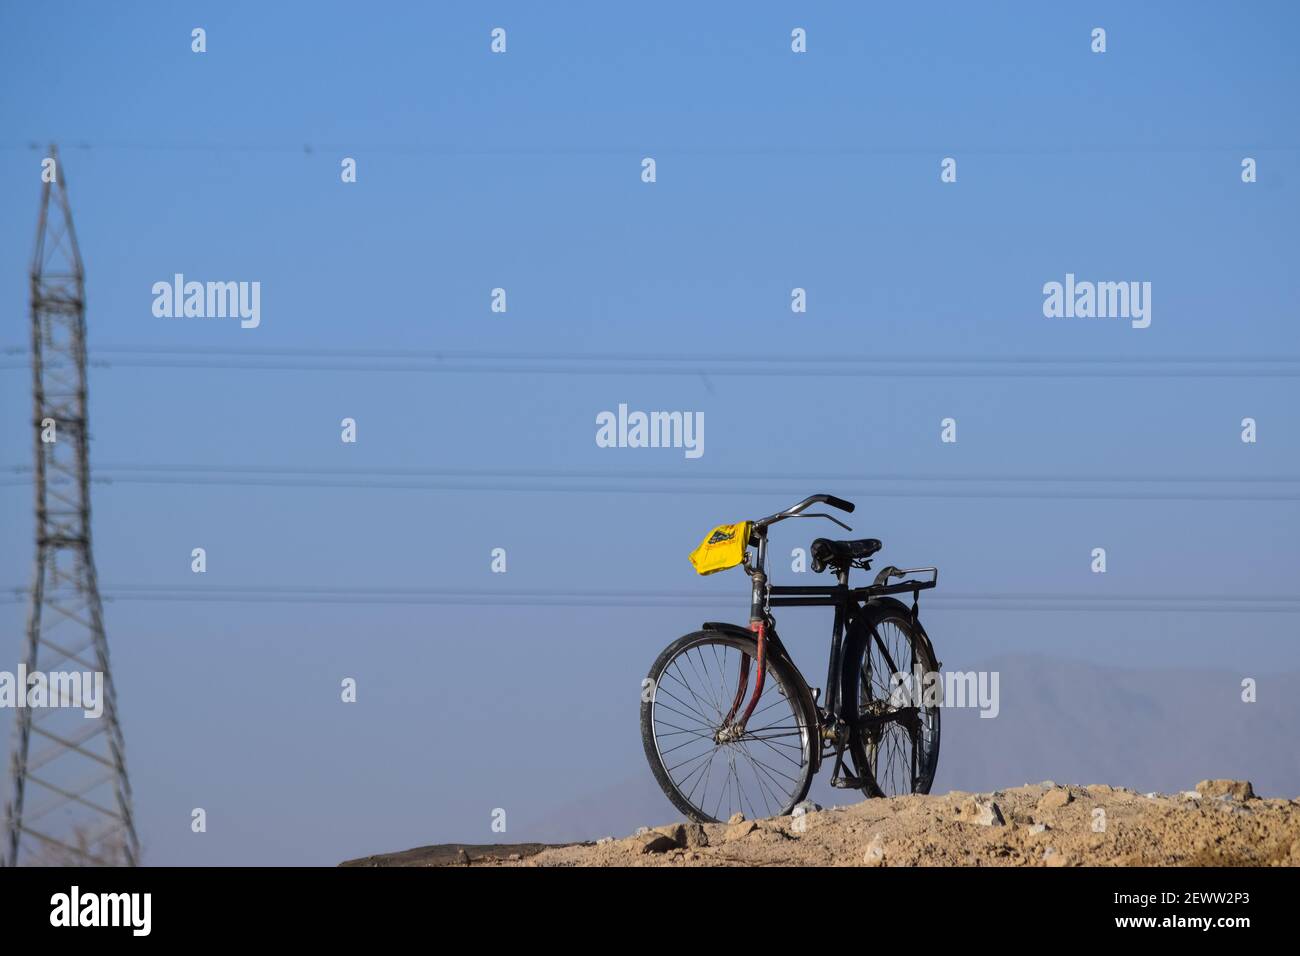 Vintage bicycle standing outside, old worker cycle outdoor landscape nature grass plants bushes Quetta Balochistan Pakistan wallpaper Stock Photo